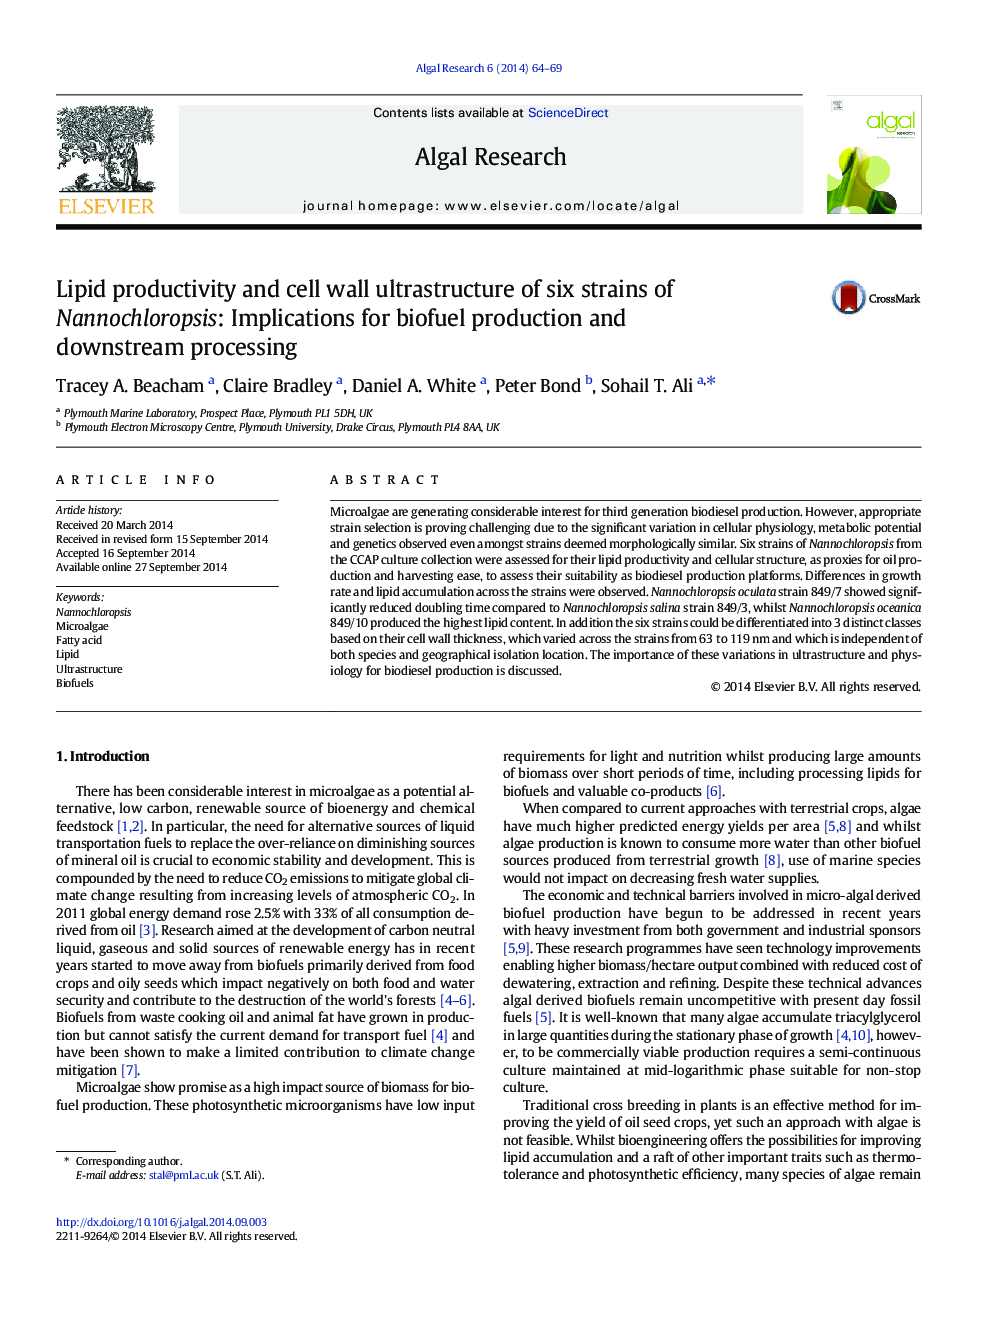 Lipid productivity and cell wall ultrastructure of six strains of Nannochloropsis: Implications for biofuel production and downstream processing